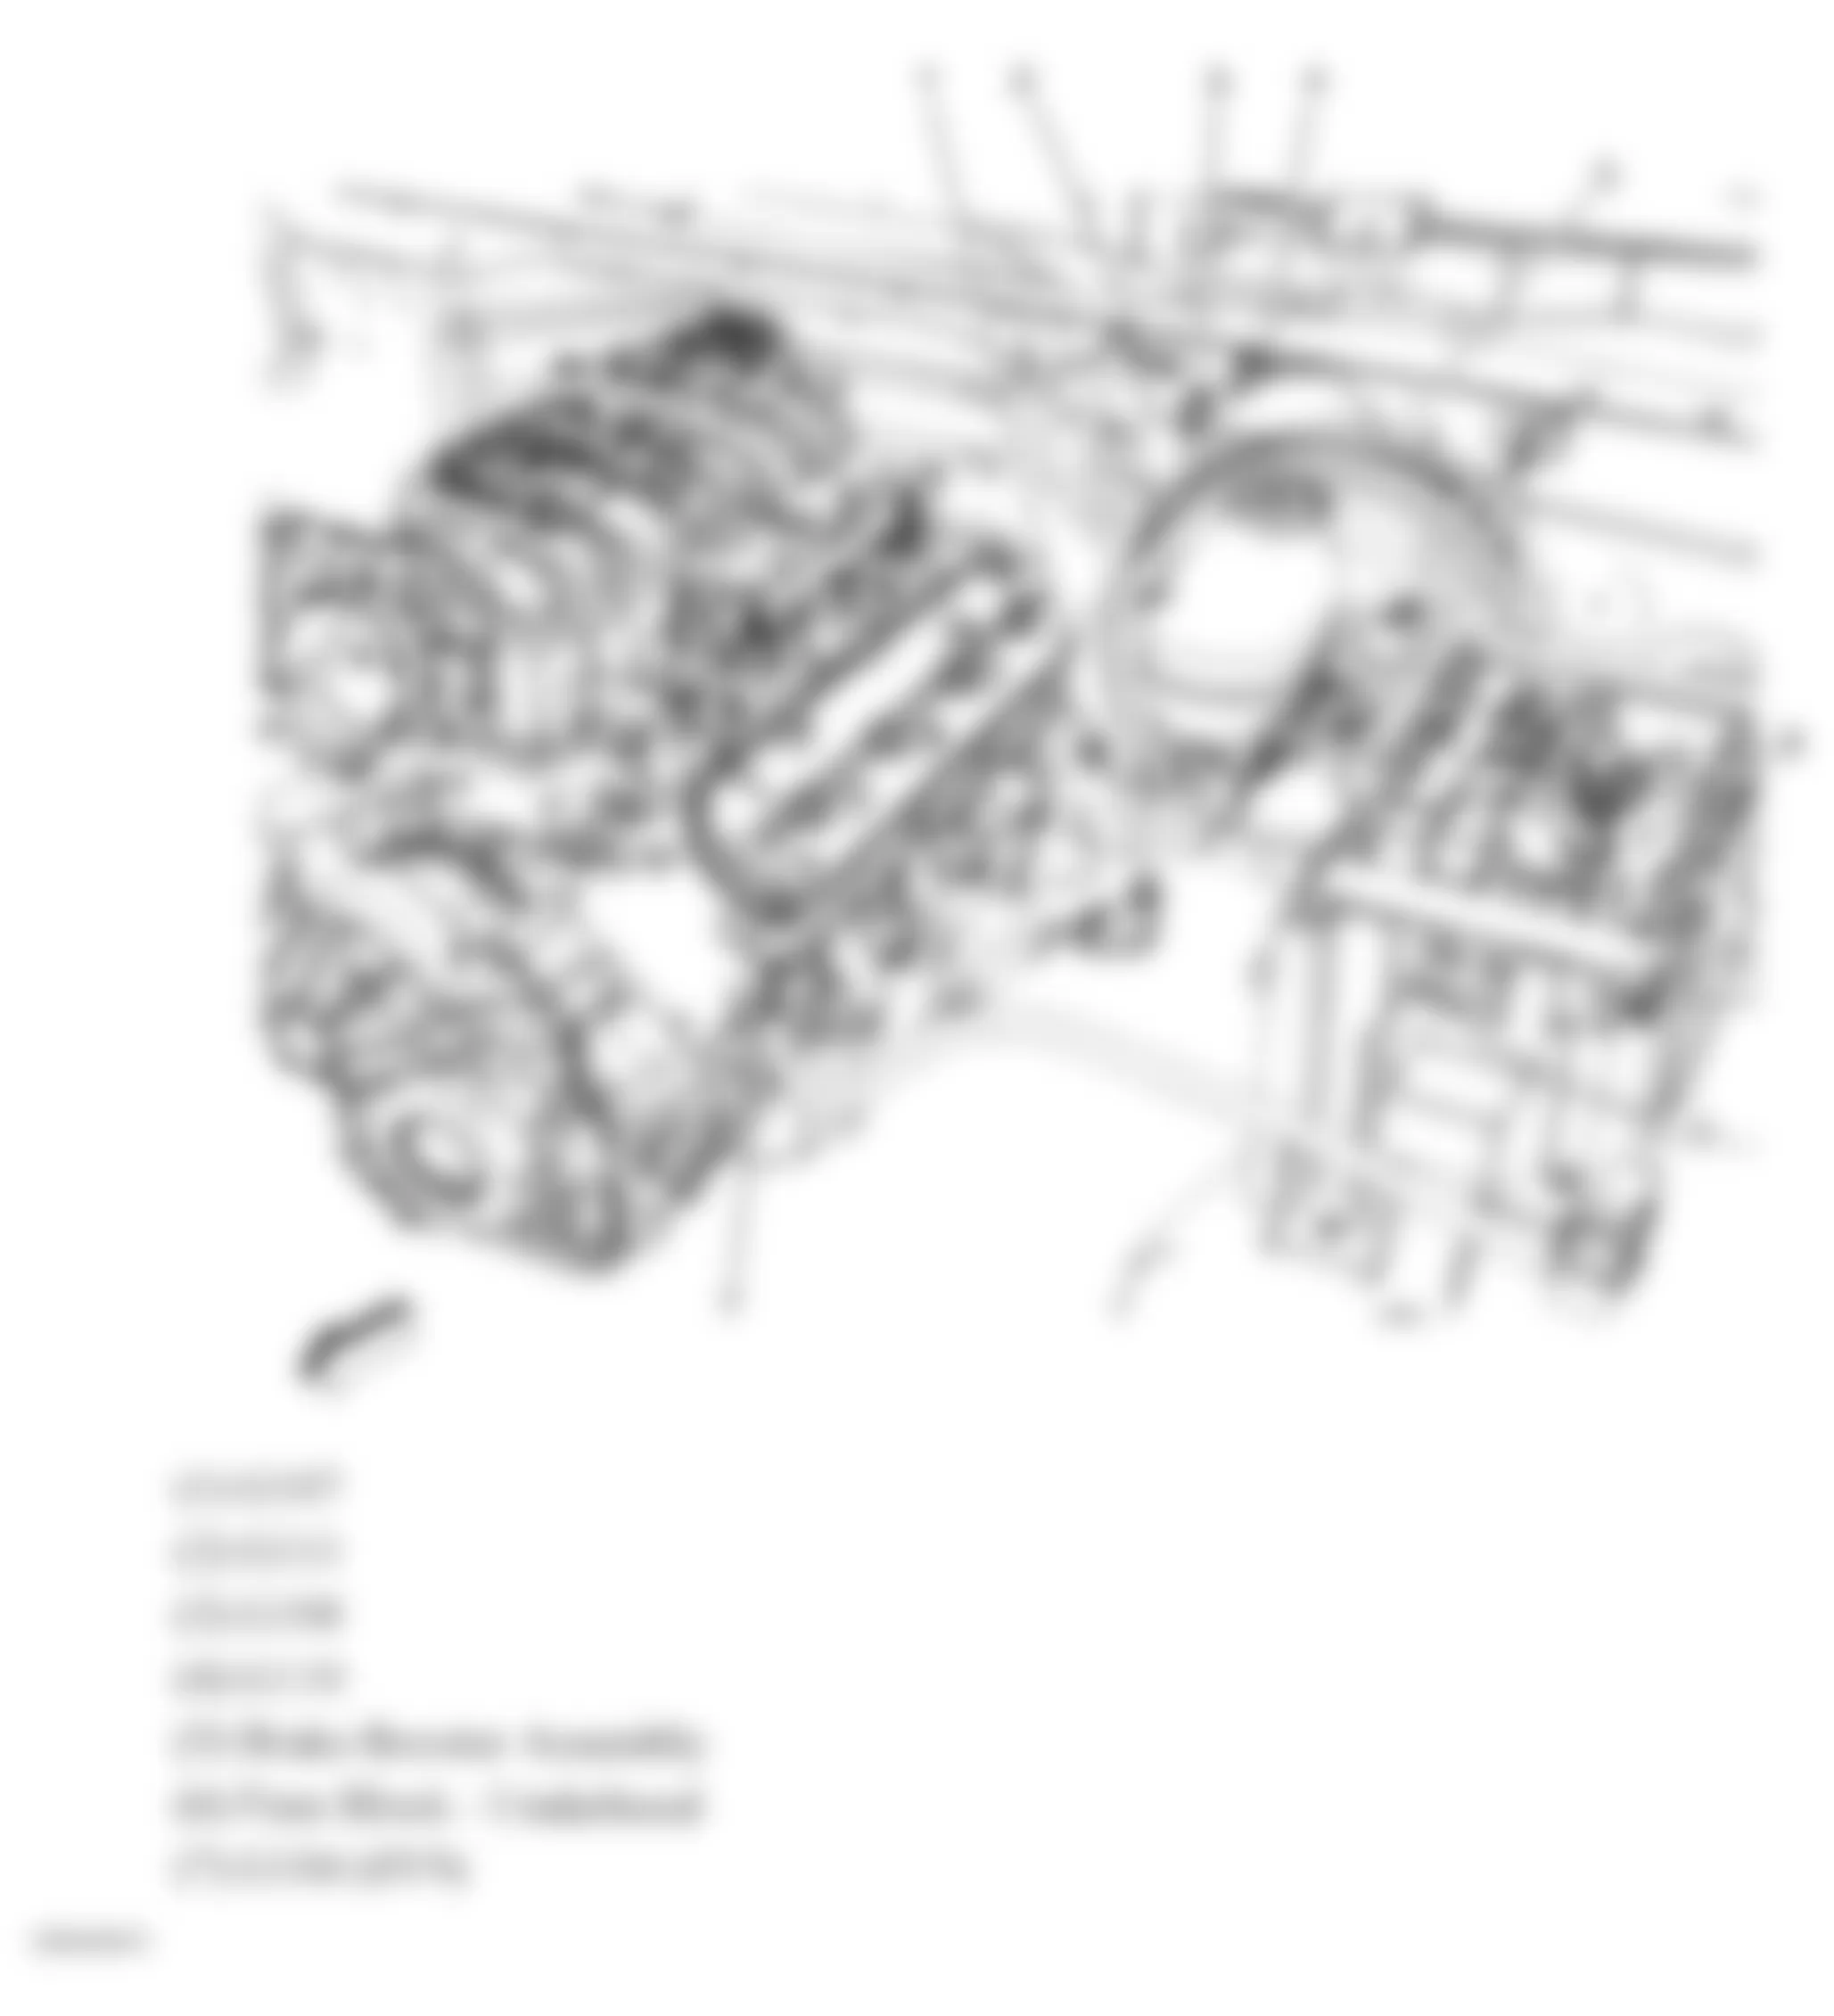 GMC Yukon Hybrid 2009 - Component Locations -  Left Side Of Engine Compartment